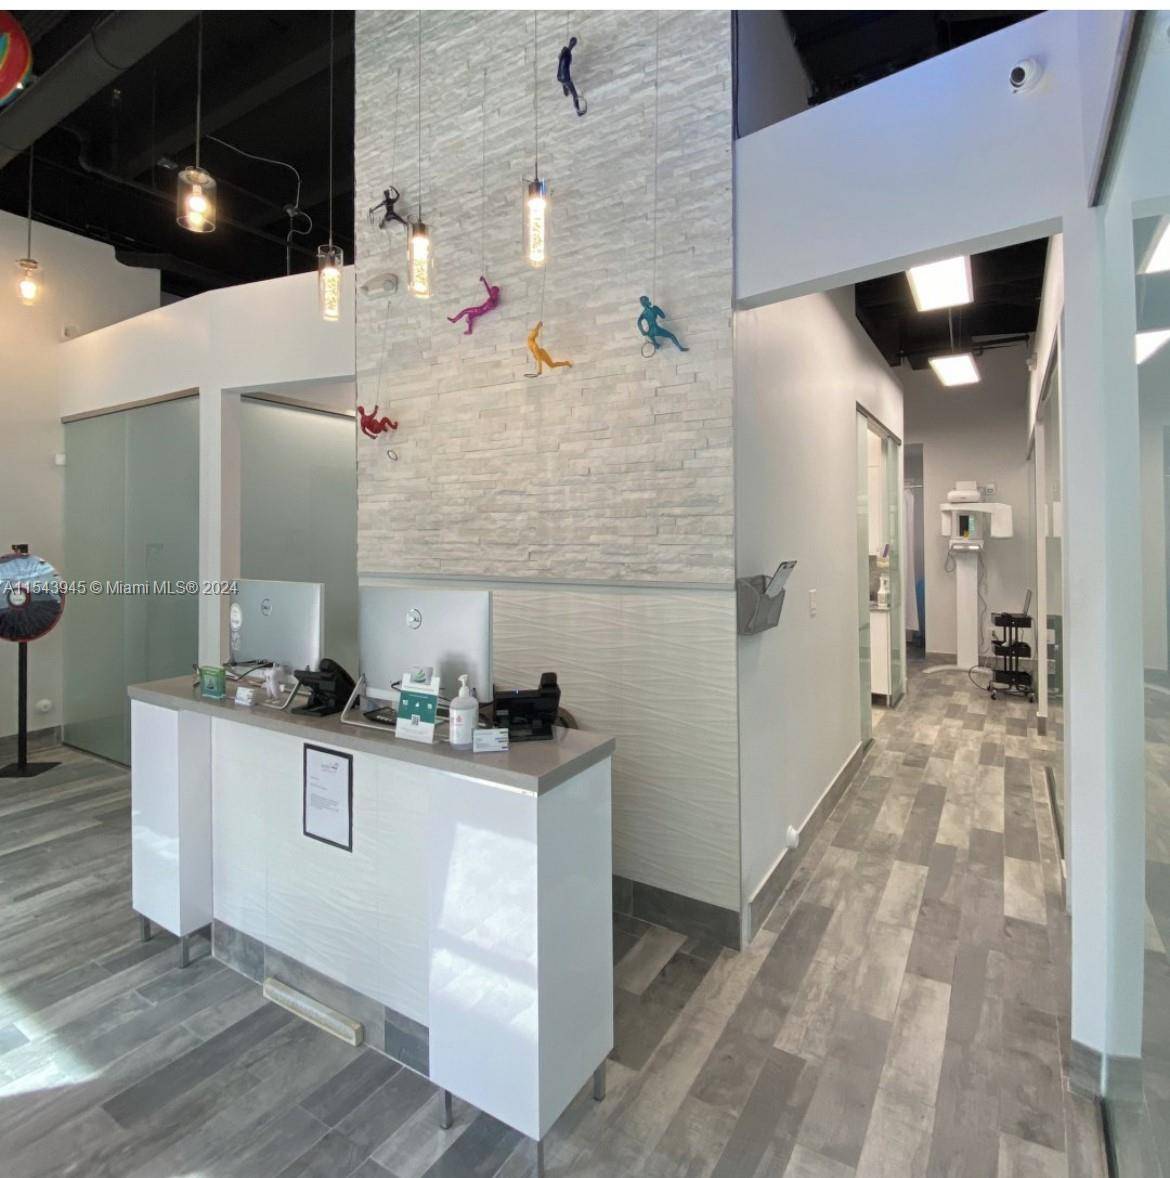 Established dental office business for sale located in the heart of Brickell.